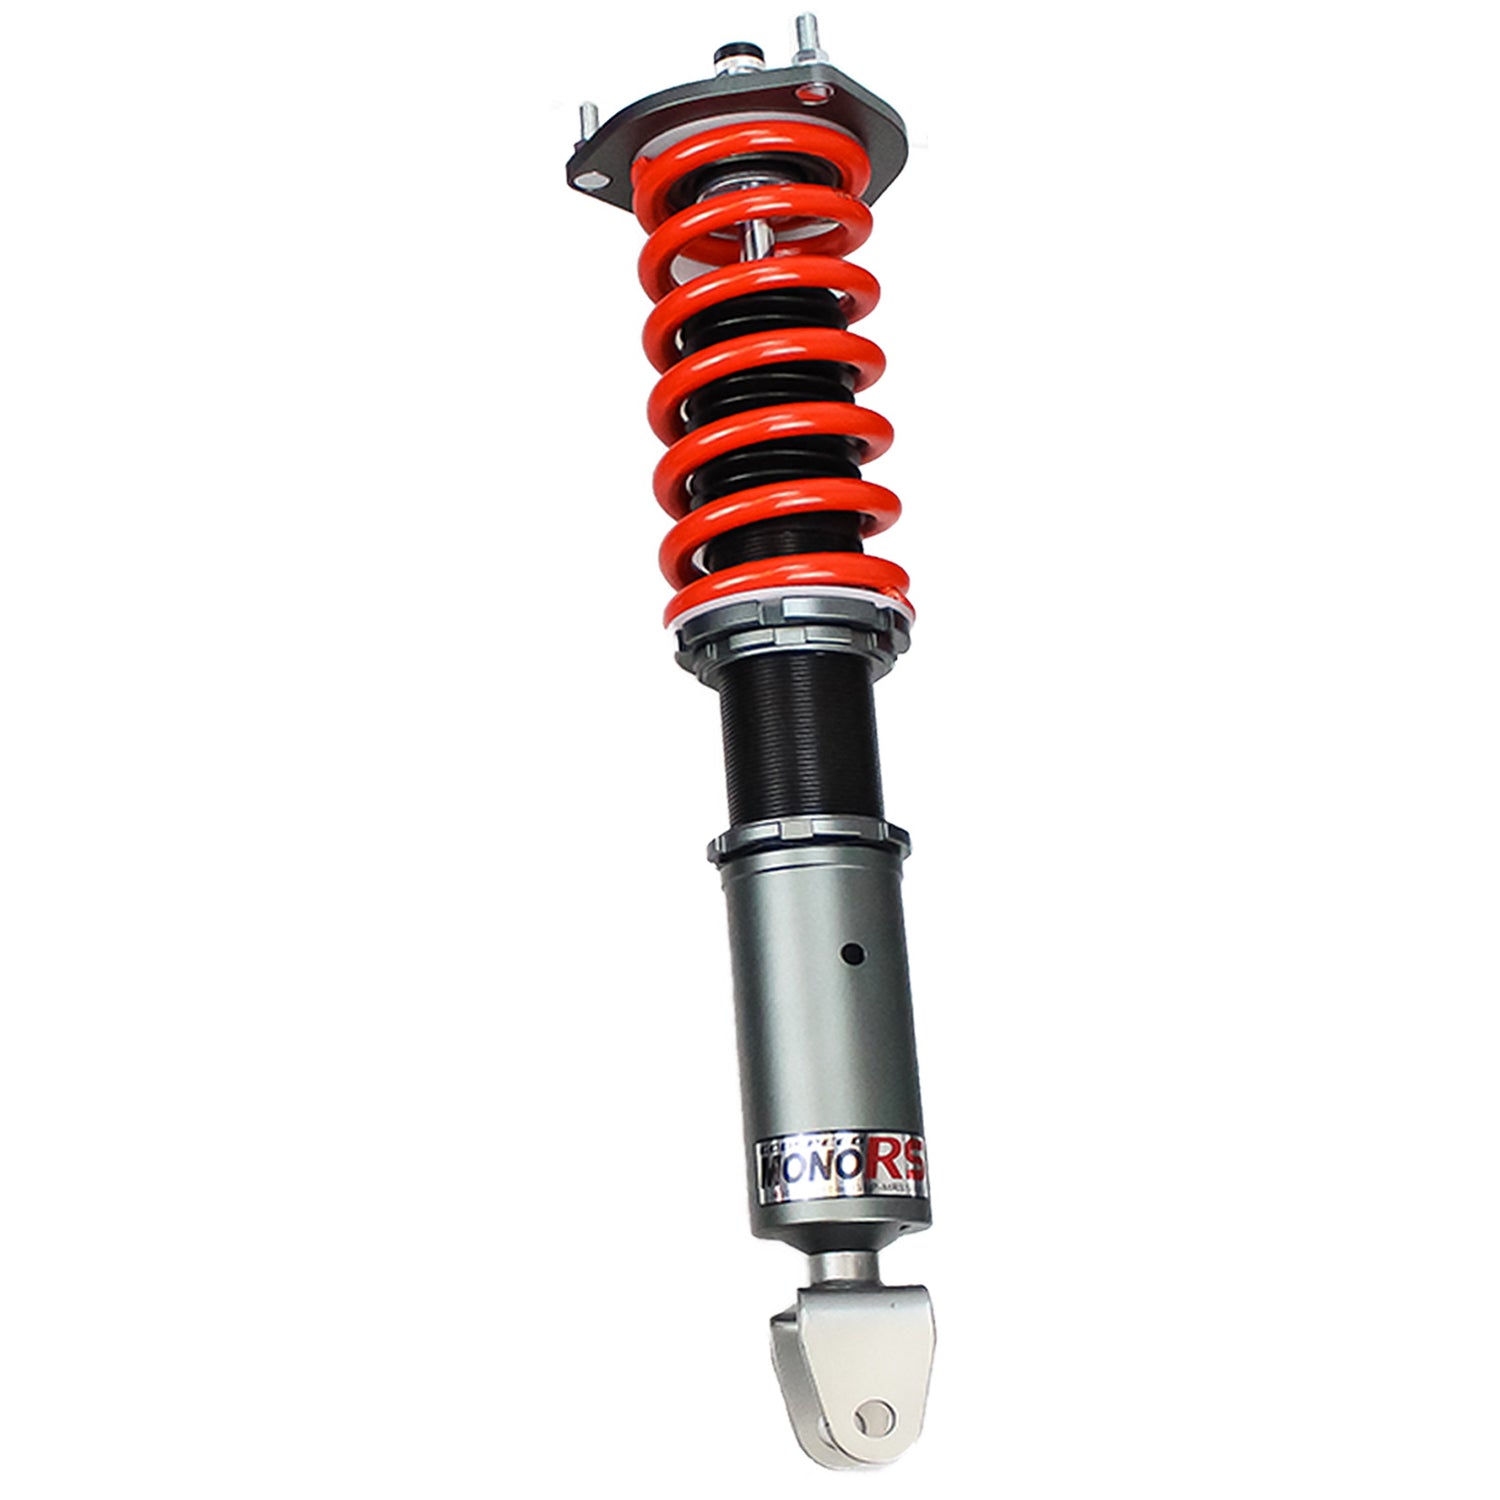 Godspeed MRS1409 MonoRS Coilover Lowering Kit, 32 Damping Adjustment, Ride Height Adjustable